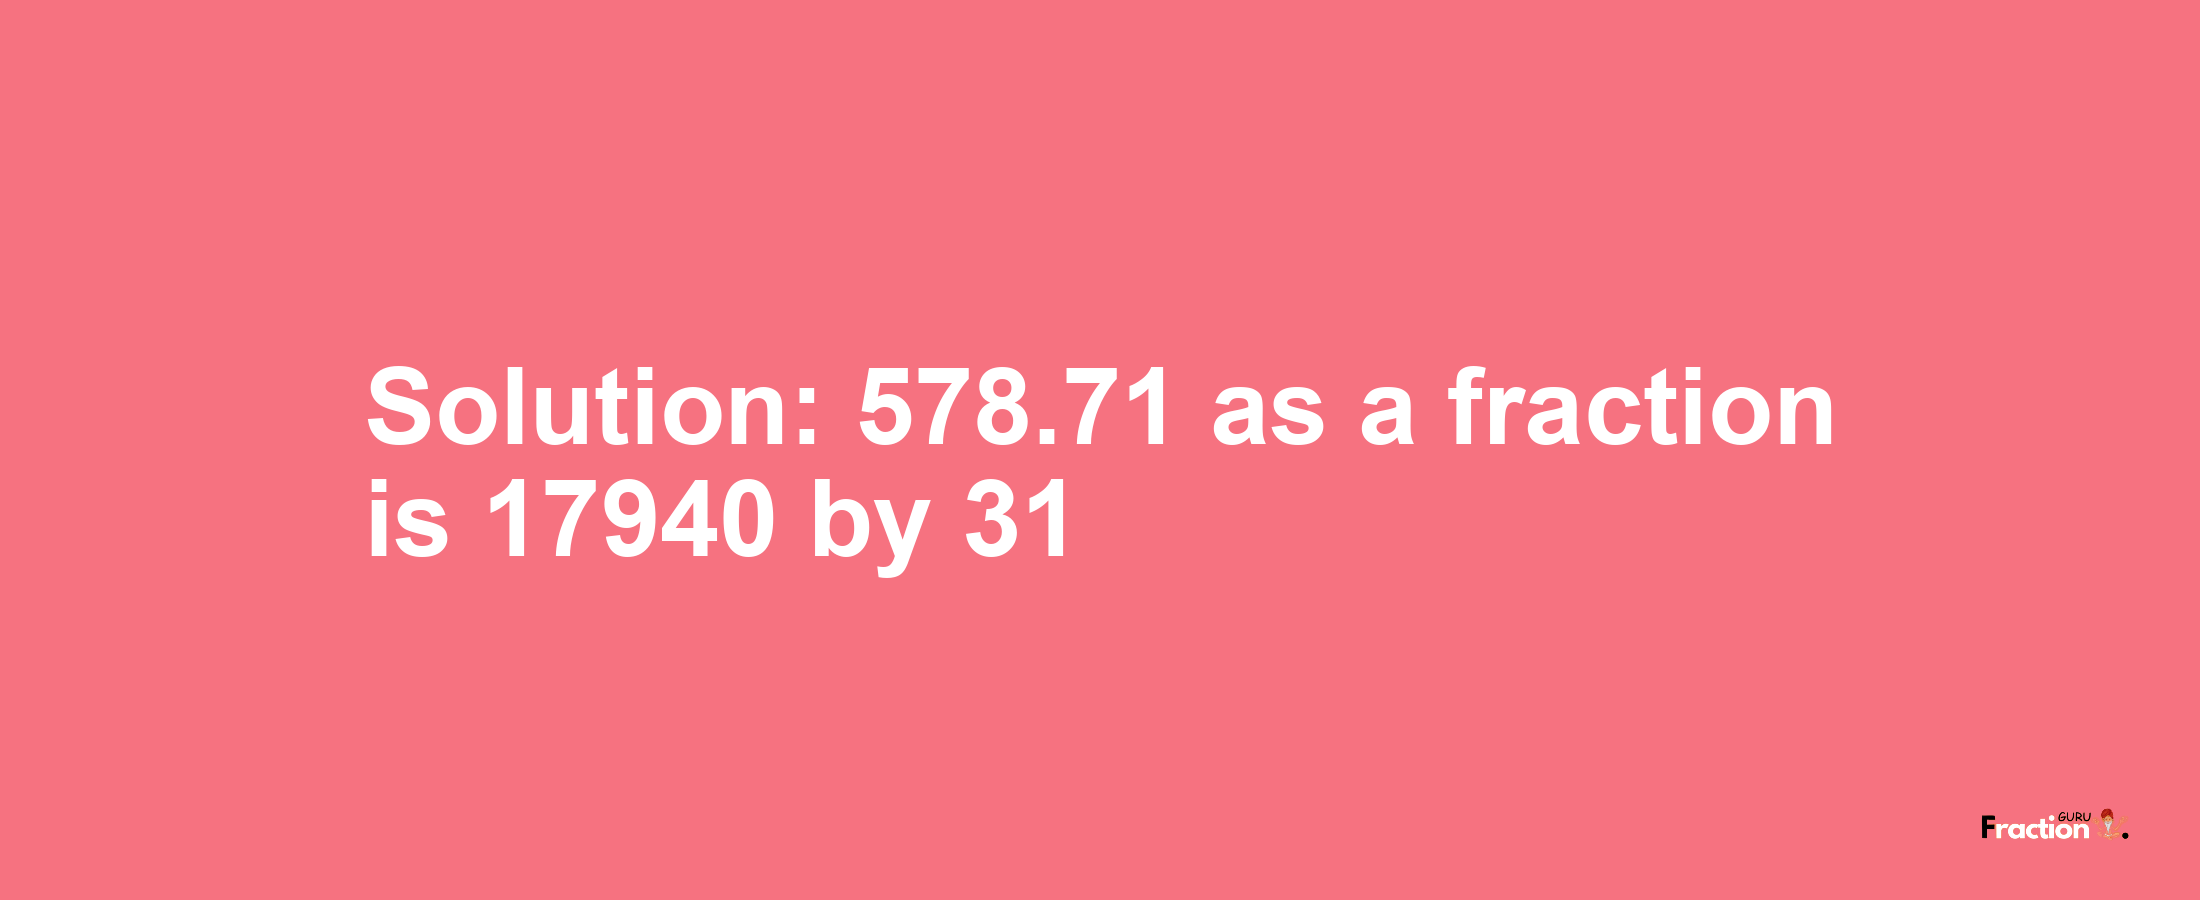 Solution:578.71 as a fraction is 17940/31